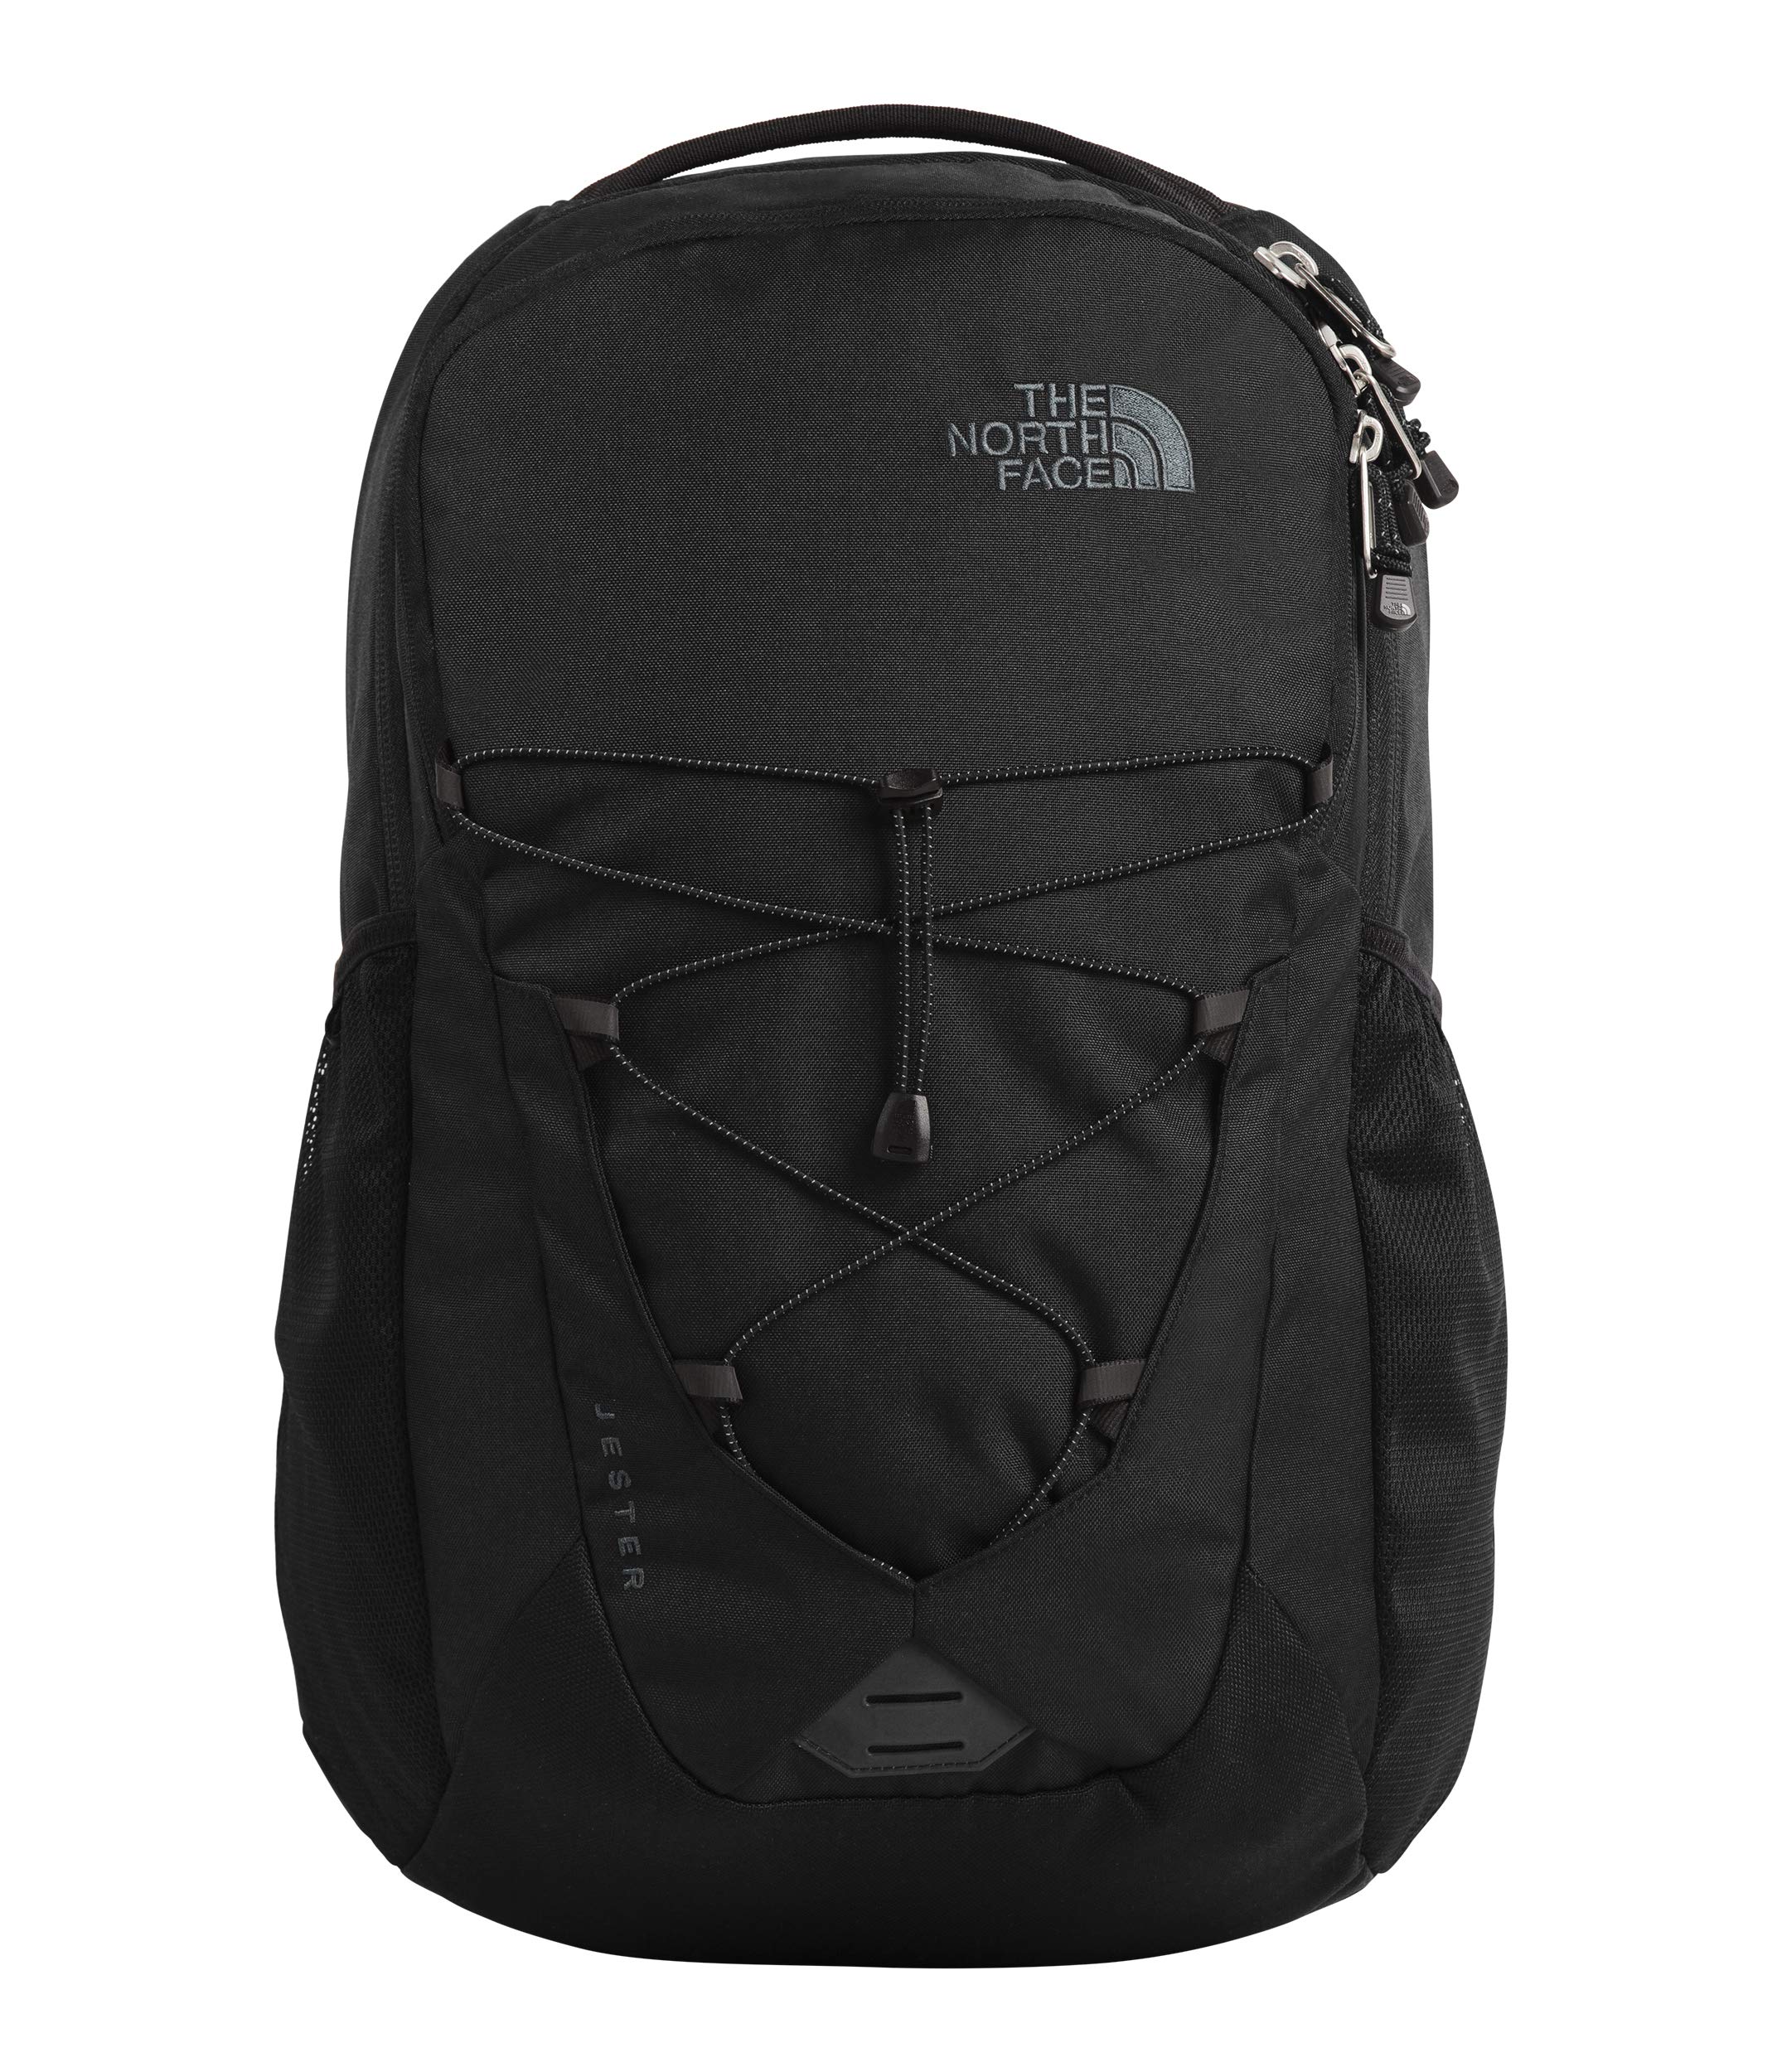 The North Face Jester Backpack, TNF Black/Silver Reflective, One